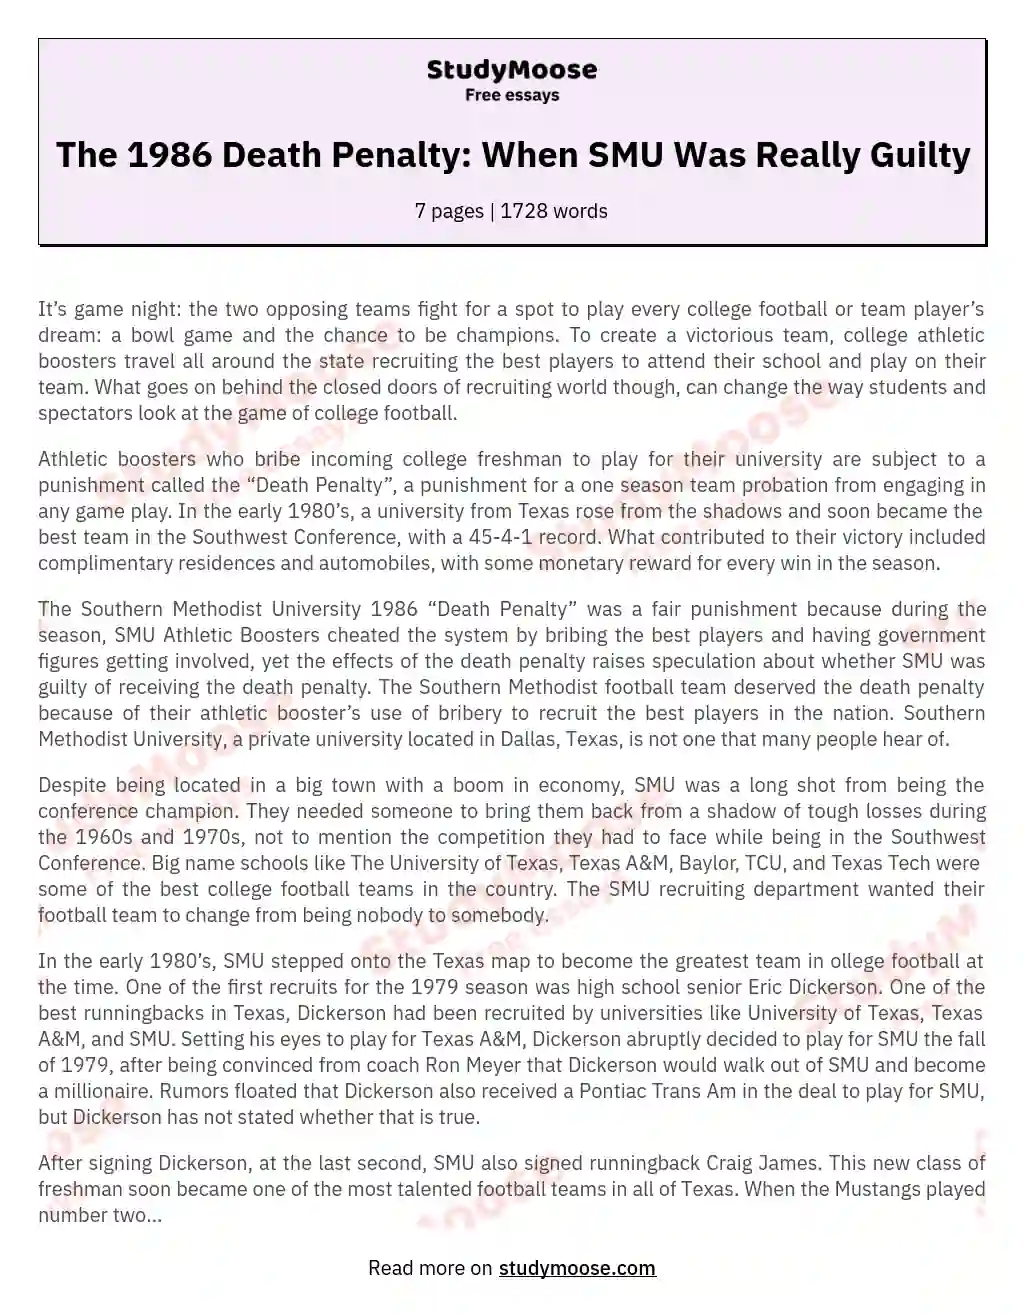 The 1986 Death Penalty: When SMU Was Really Guilty